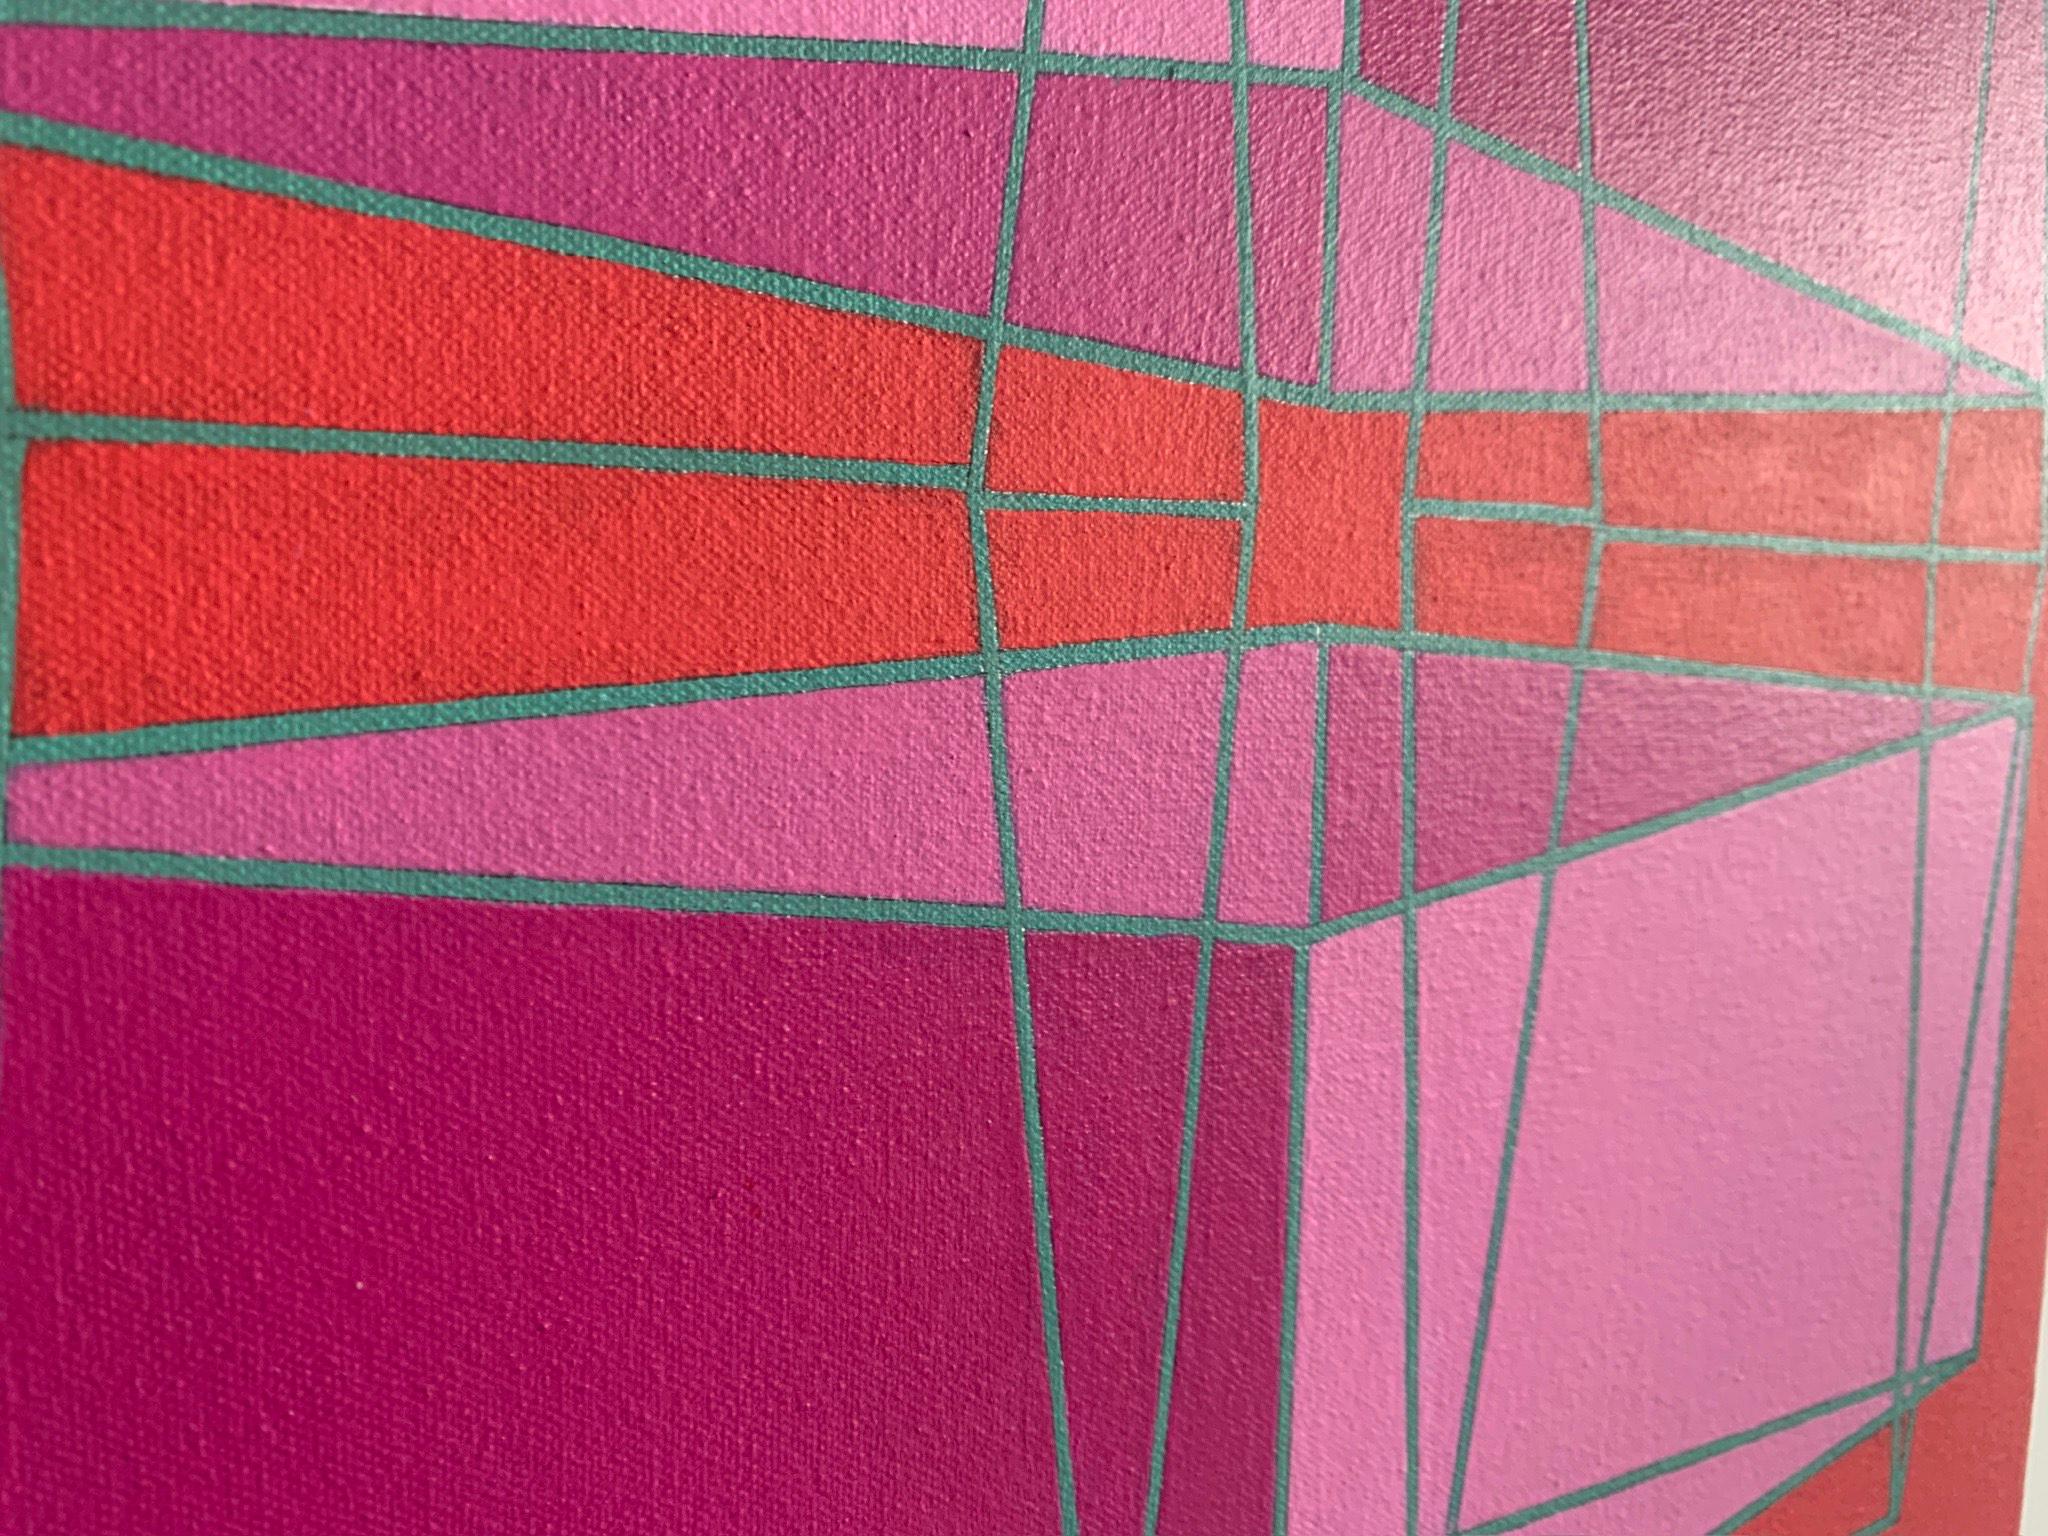 Intersecting Cubes #9: geometric abstract Op Art painting, pink & gray on orange - Abstract Painting by Benjamin Weaver